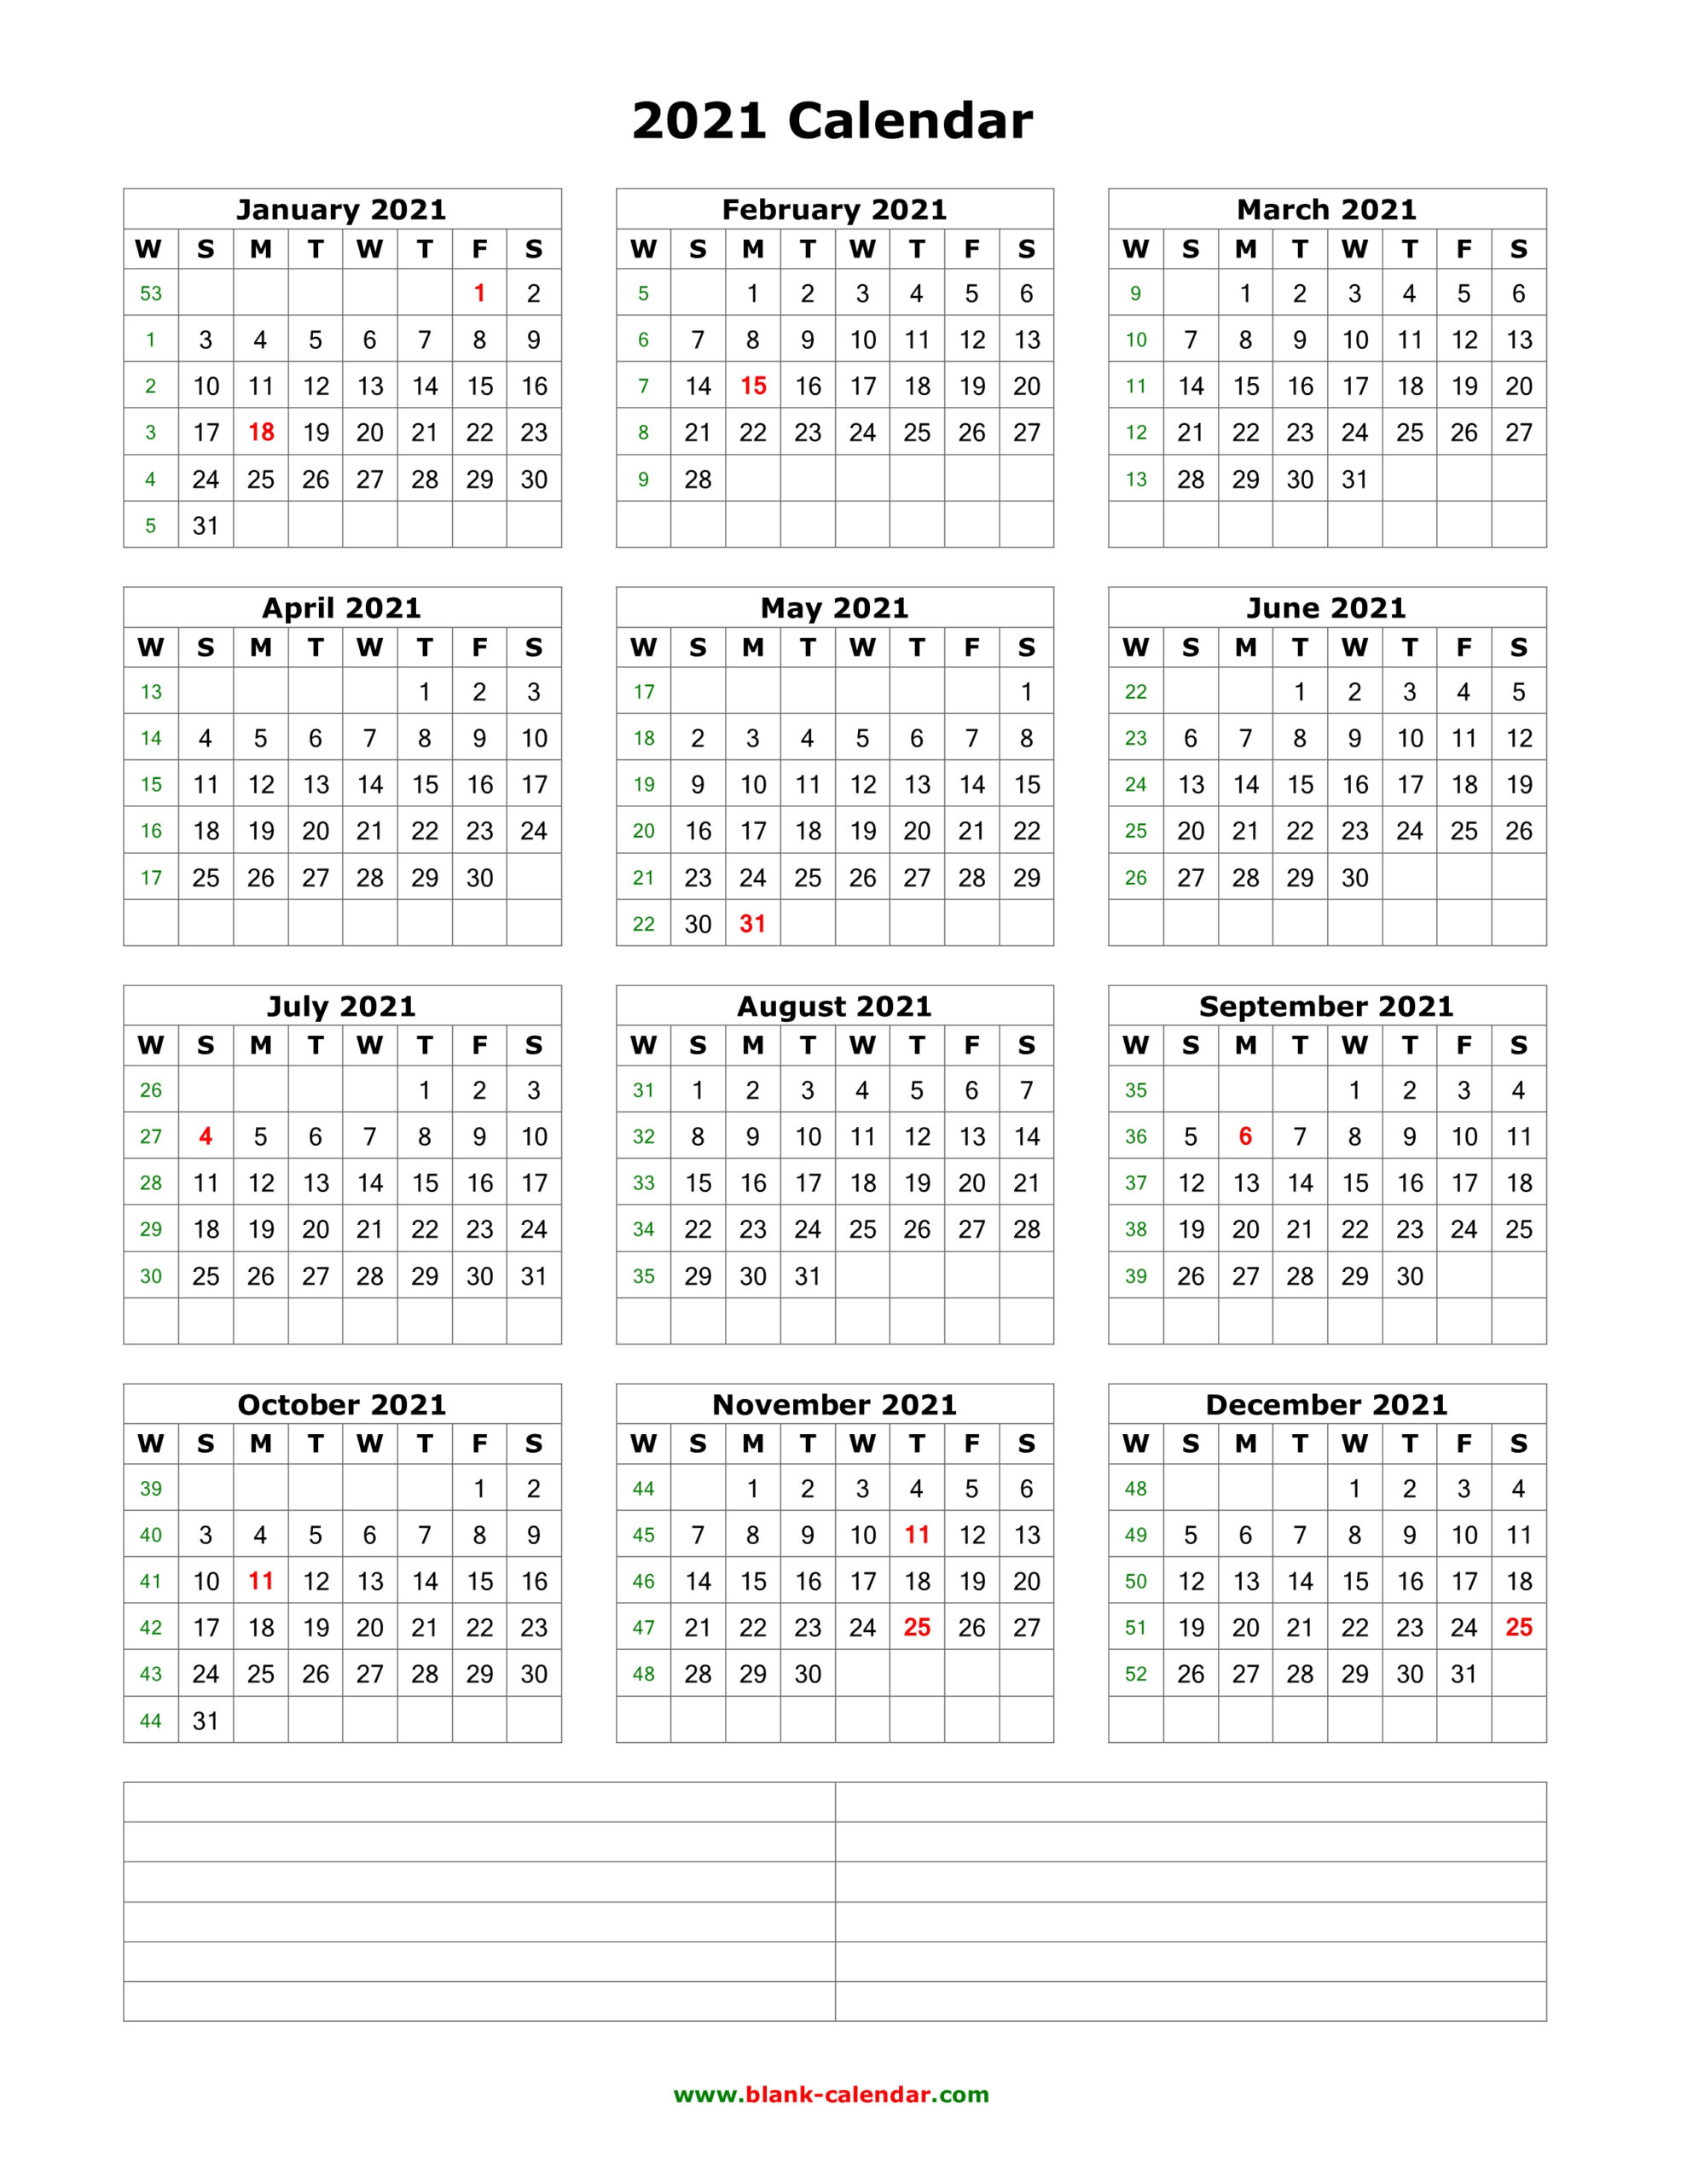 Download Blank Calendar 2021 With Space For Notes (12 Months